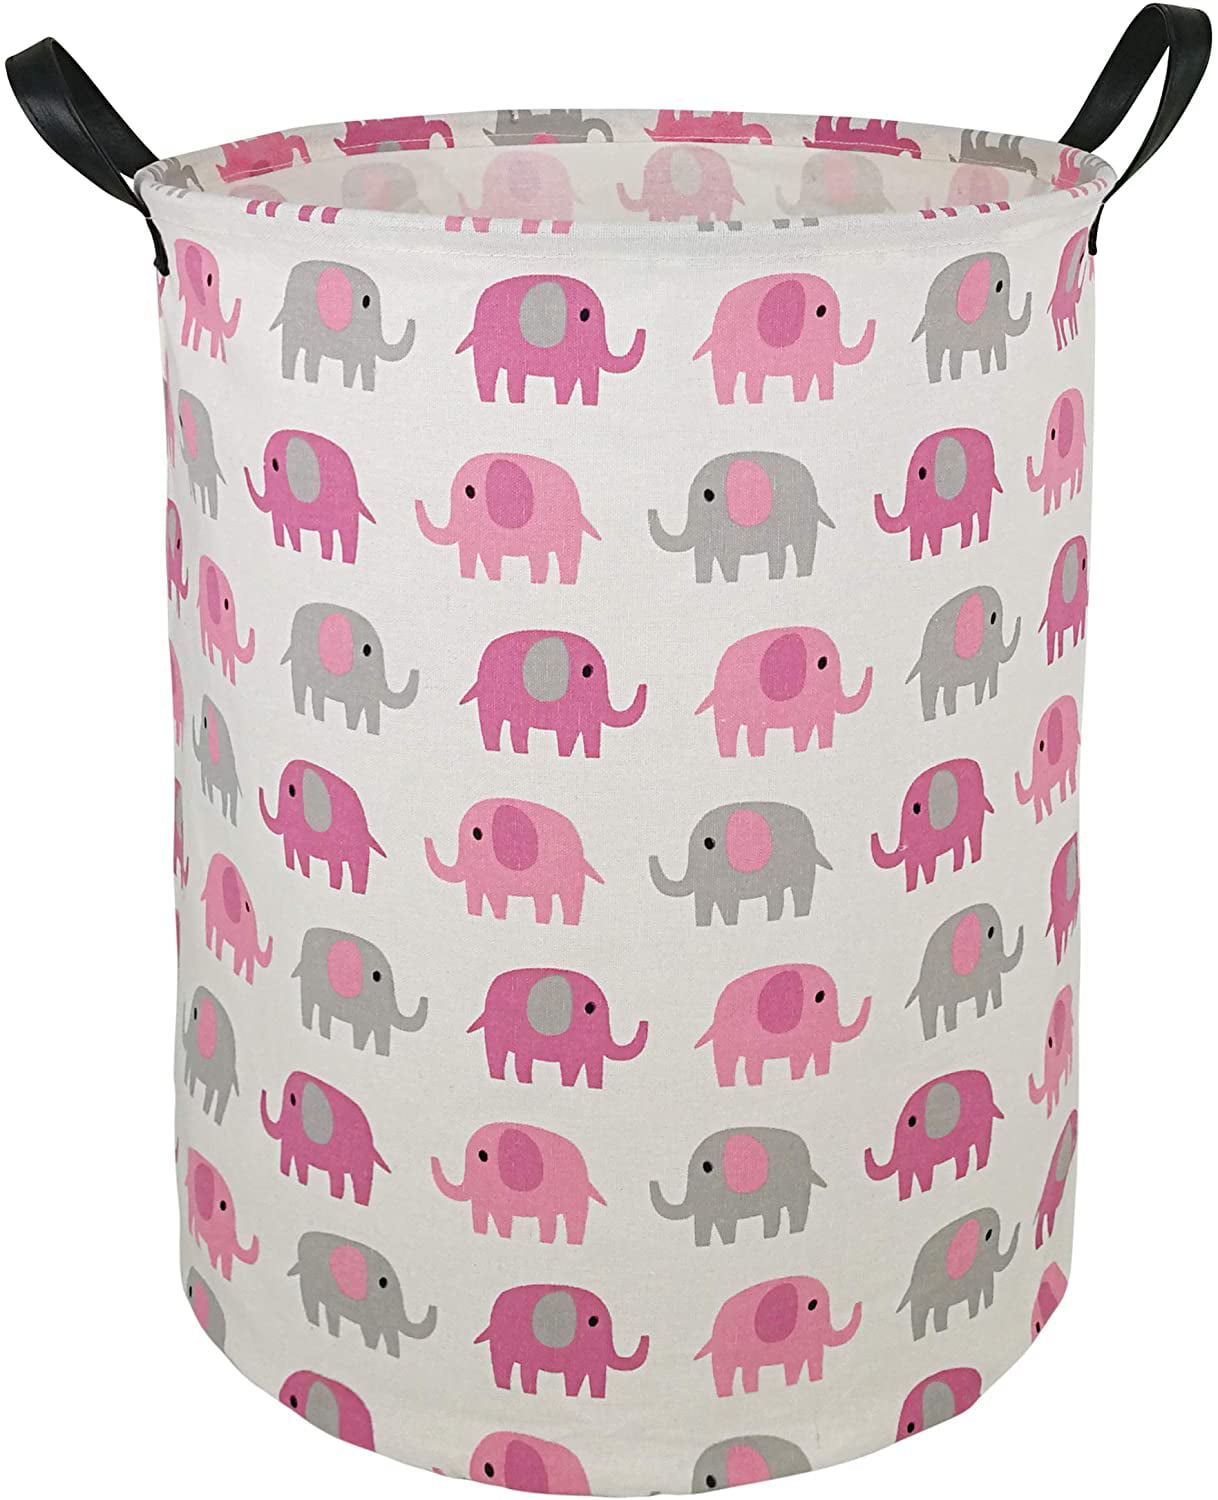 Waterproof Coating Storage Basket with Handles Kids Room Elephant Toy Bins Children Laundry Hamper 19.6 Inches Large Round Collapsible Canvas Organizer Bins for Nursery Dirty Clothes 